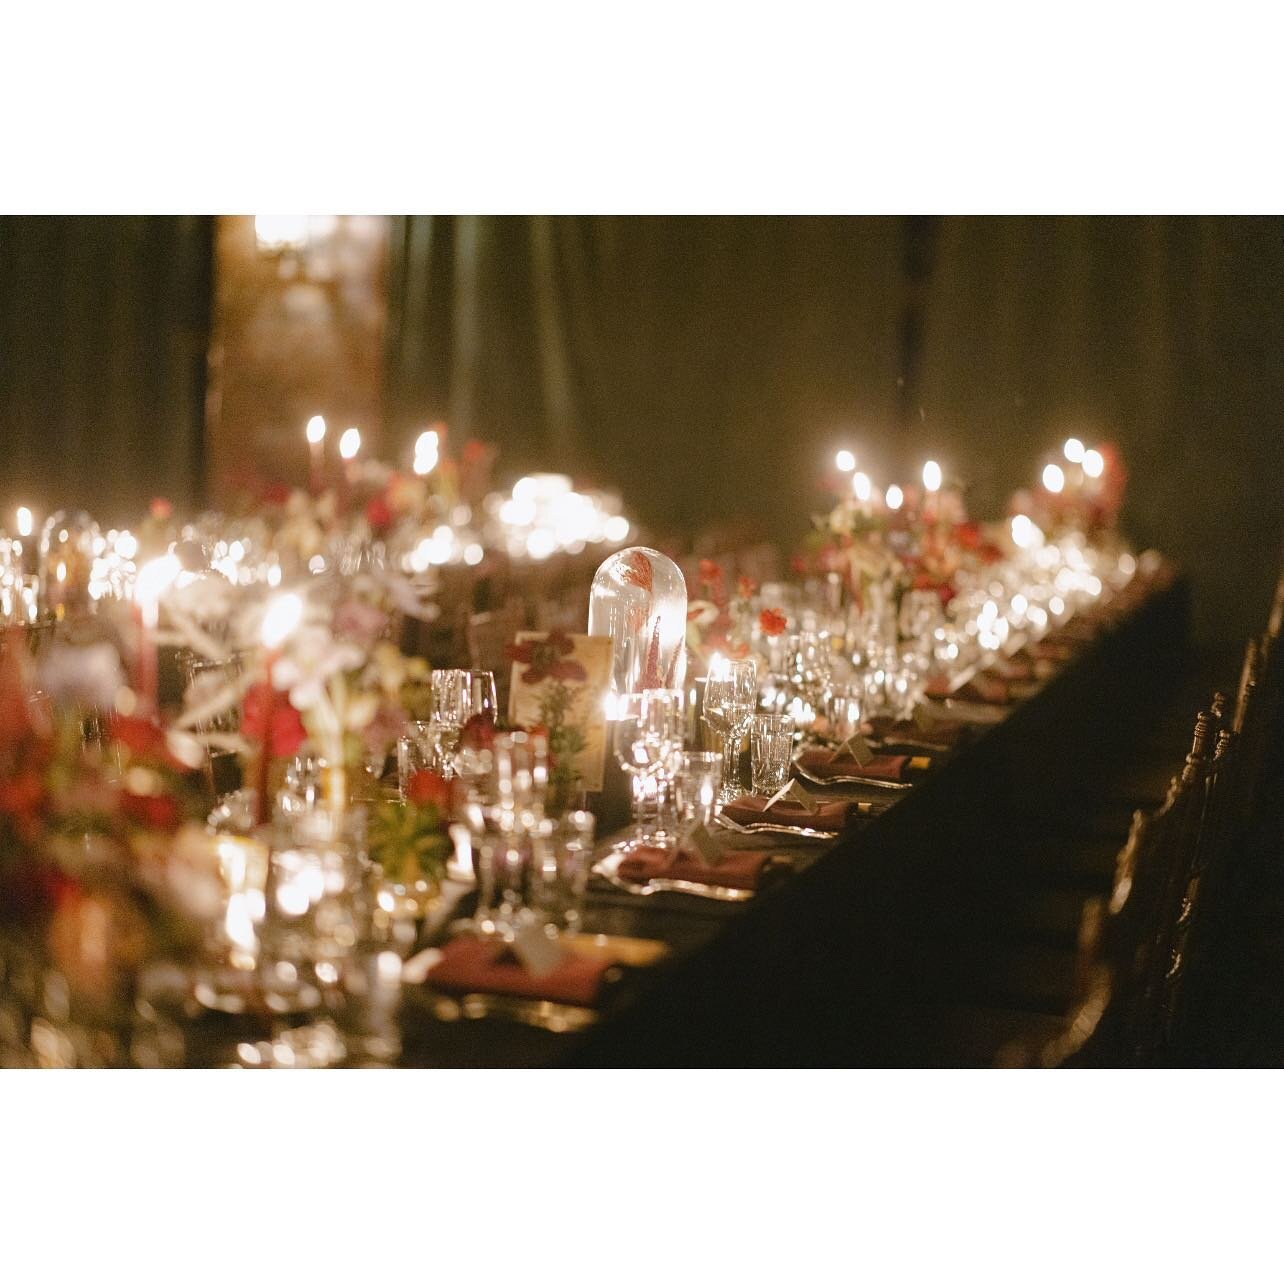 A continuation of E+J&rsquo;s wedding with this reception space! Burgundy taper candles in black holders, black pillar candles and lots of tea lights gave off a nice glow on the dried flower cloches and gold accents. 10/10 would do again! 
Photograph